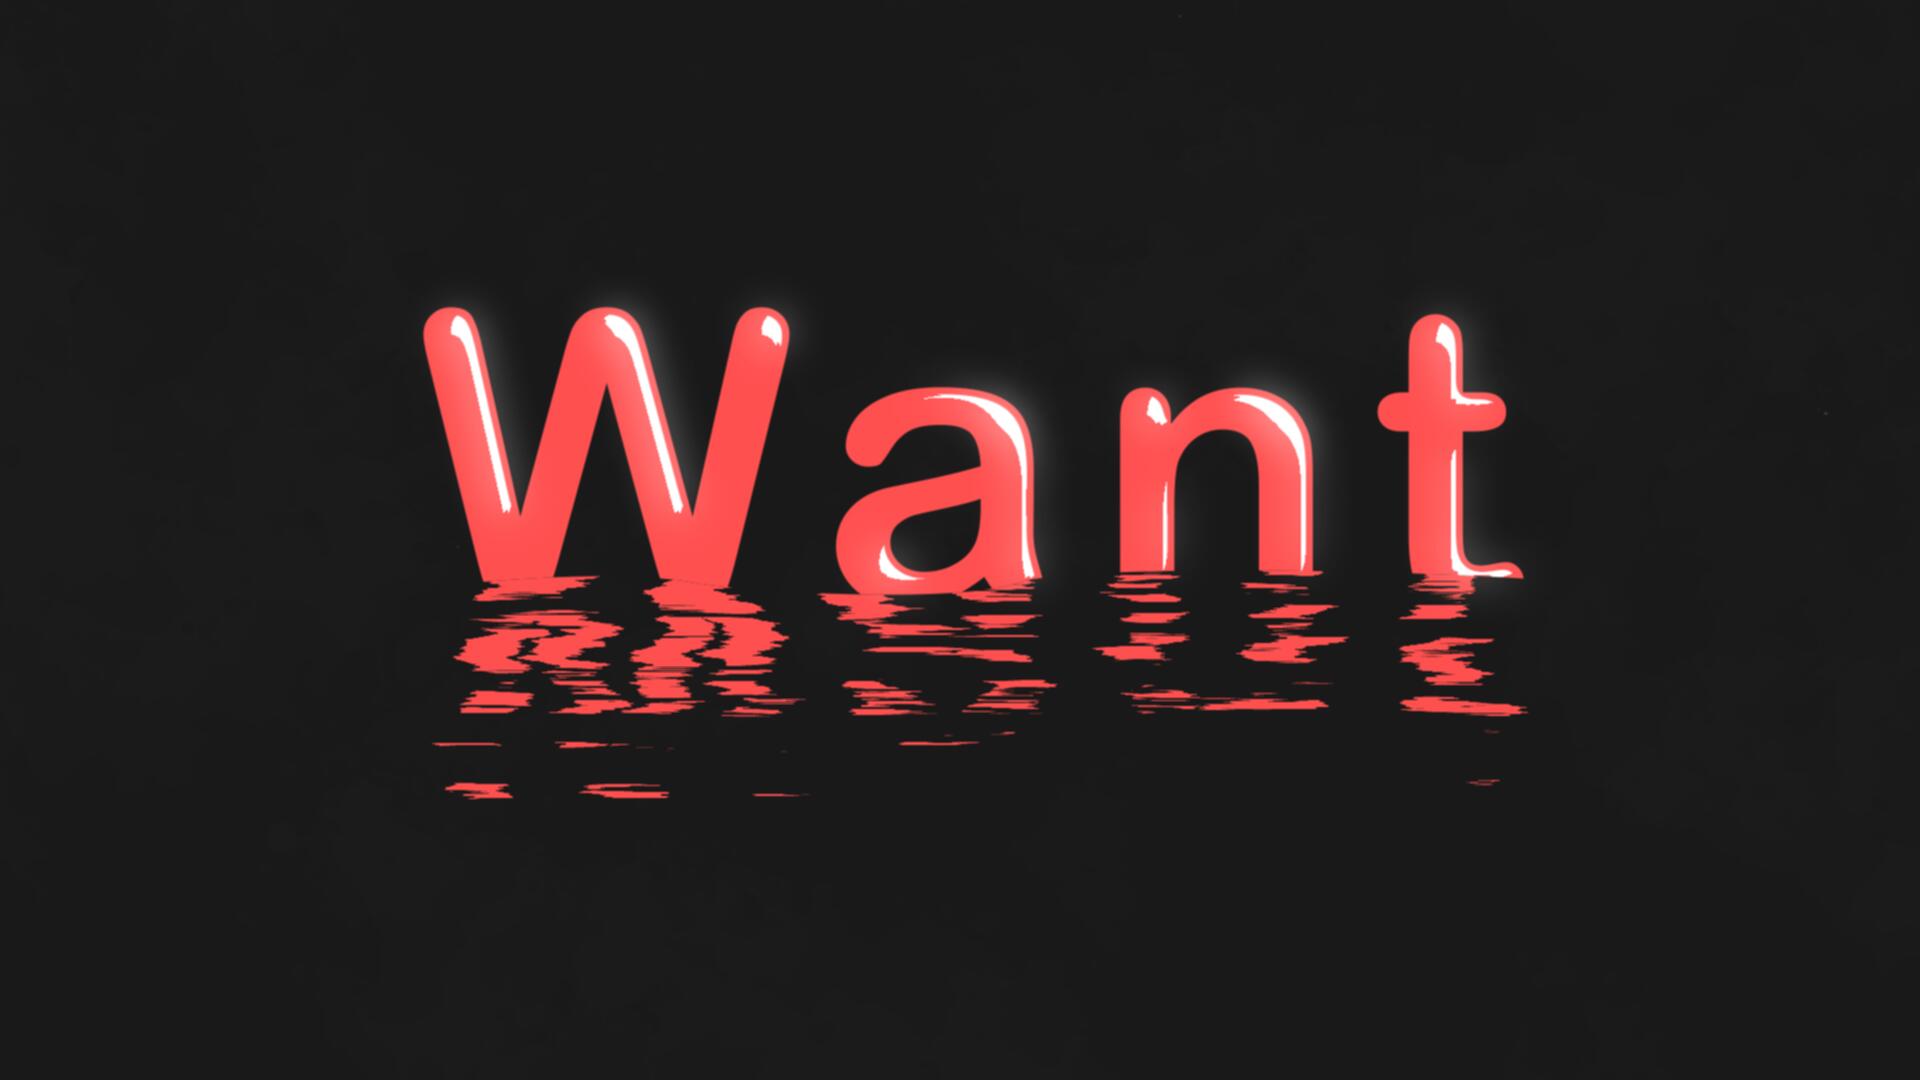 logo,text,2d,water,reflection,floating